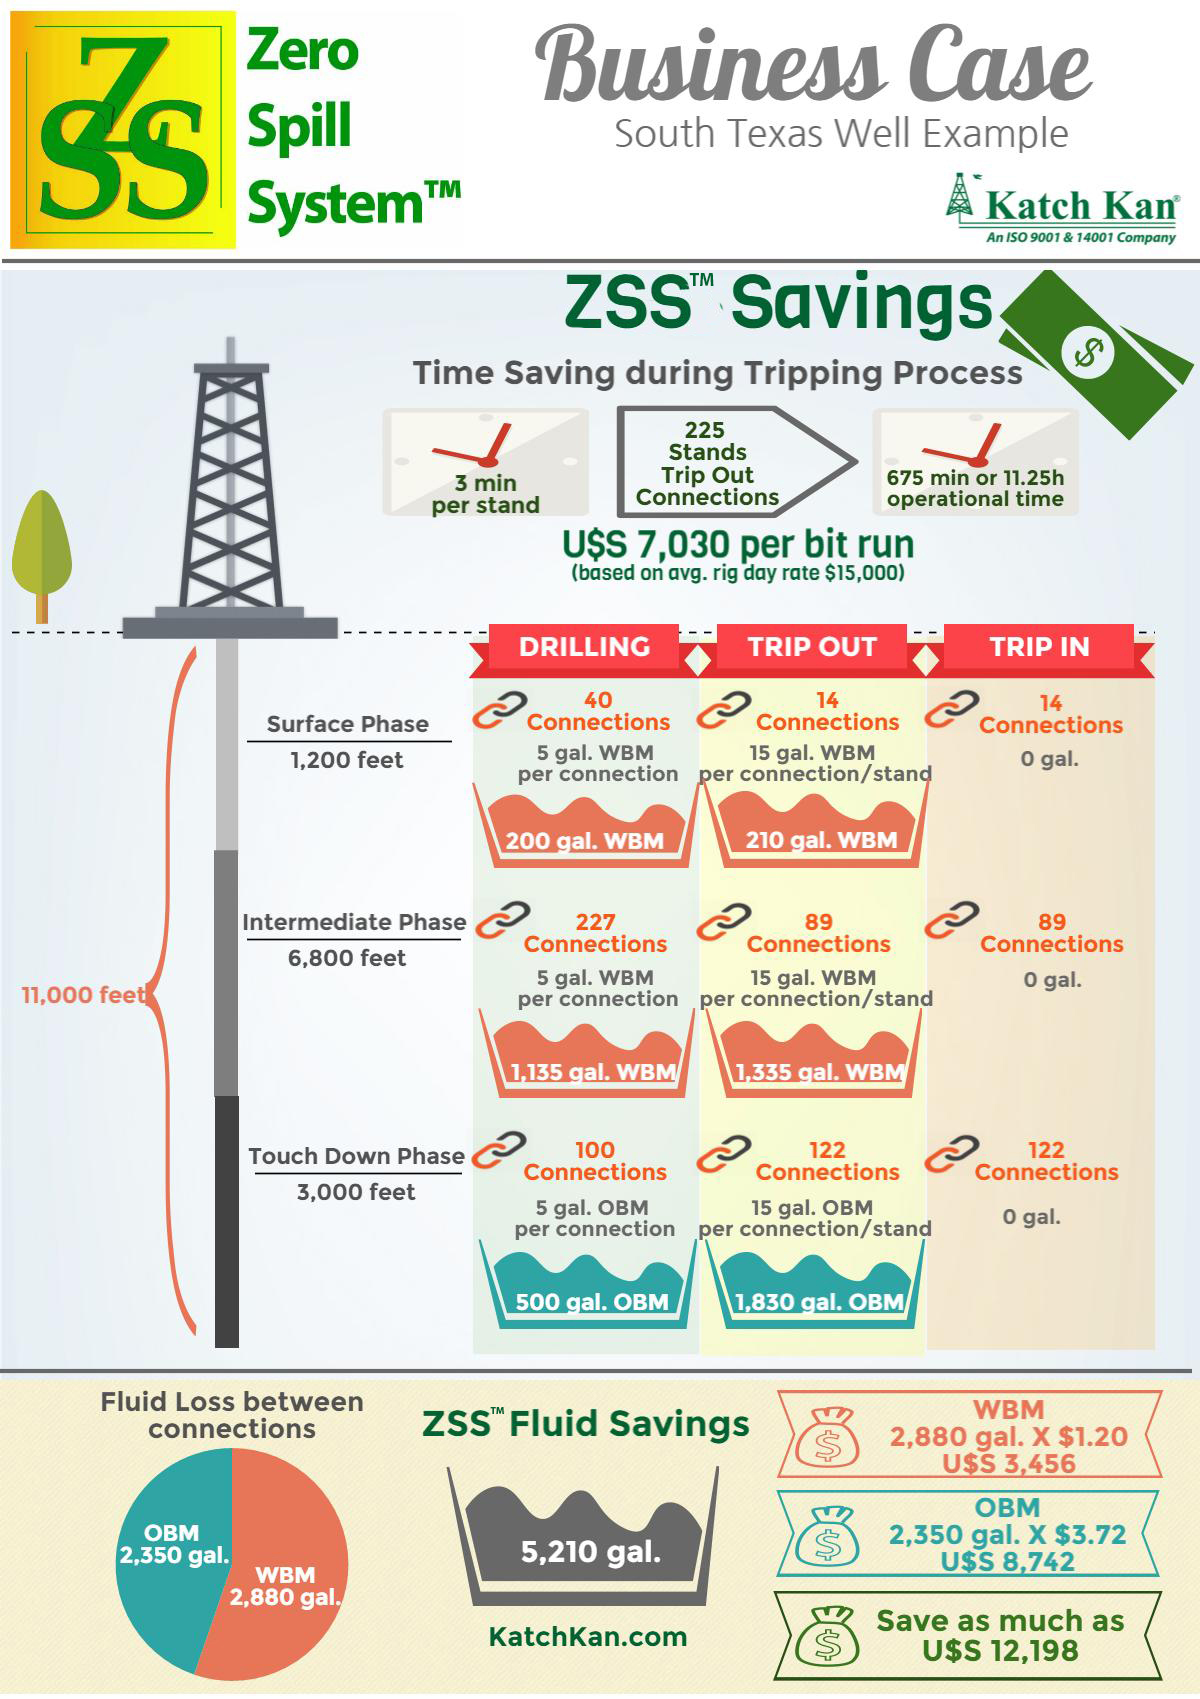 Time and Mud Savings during drilling process